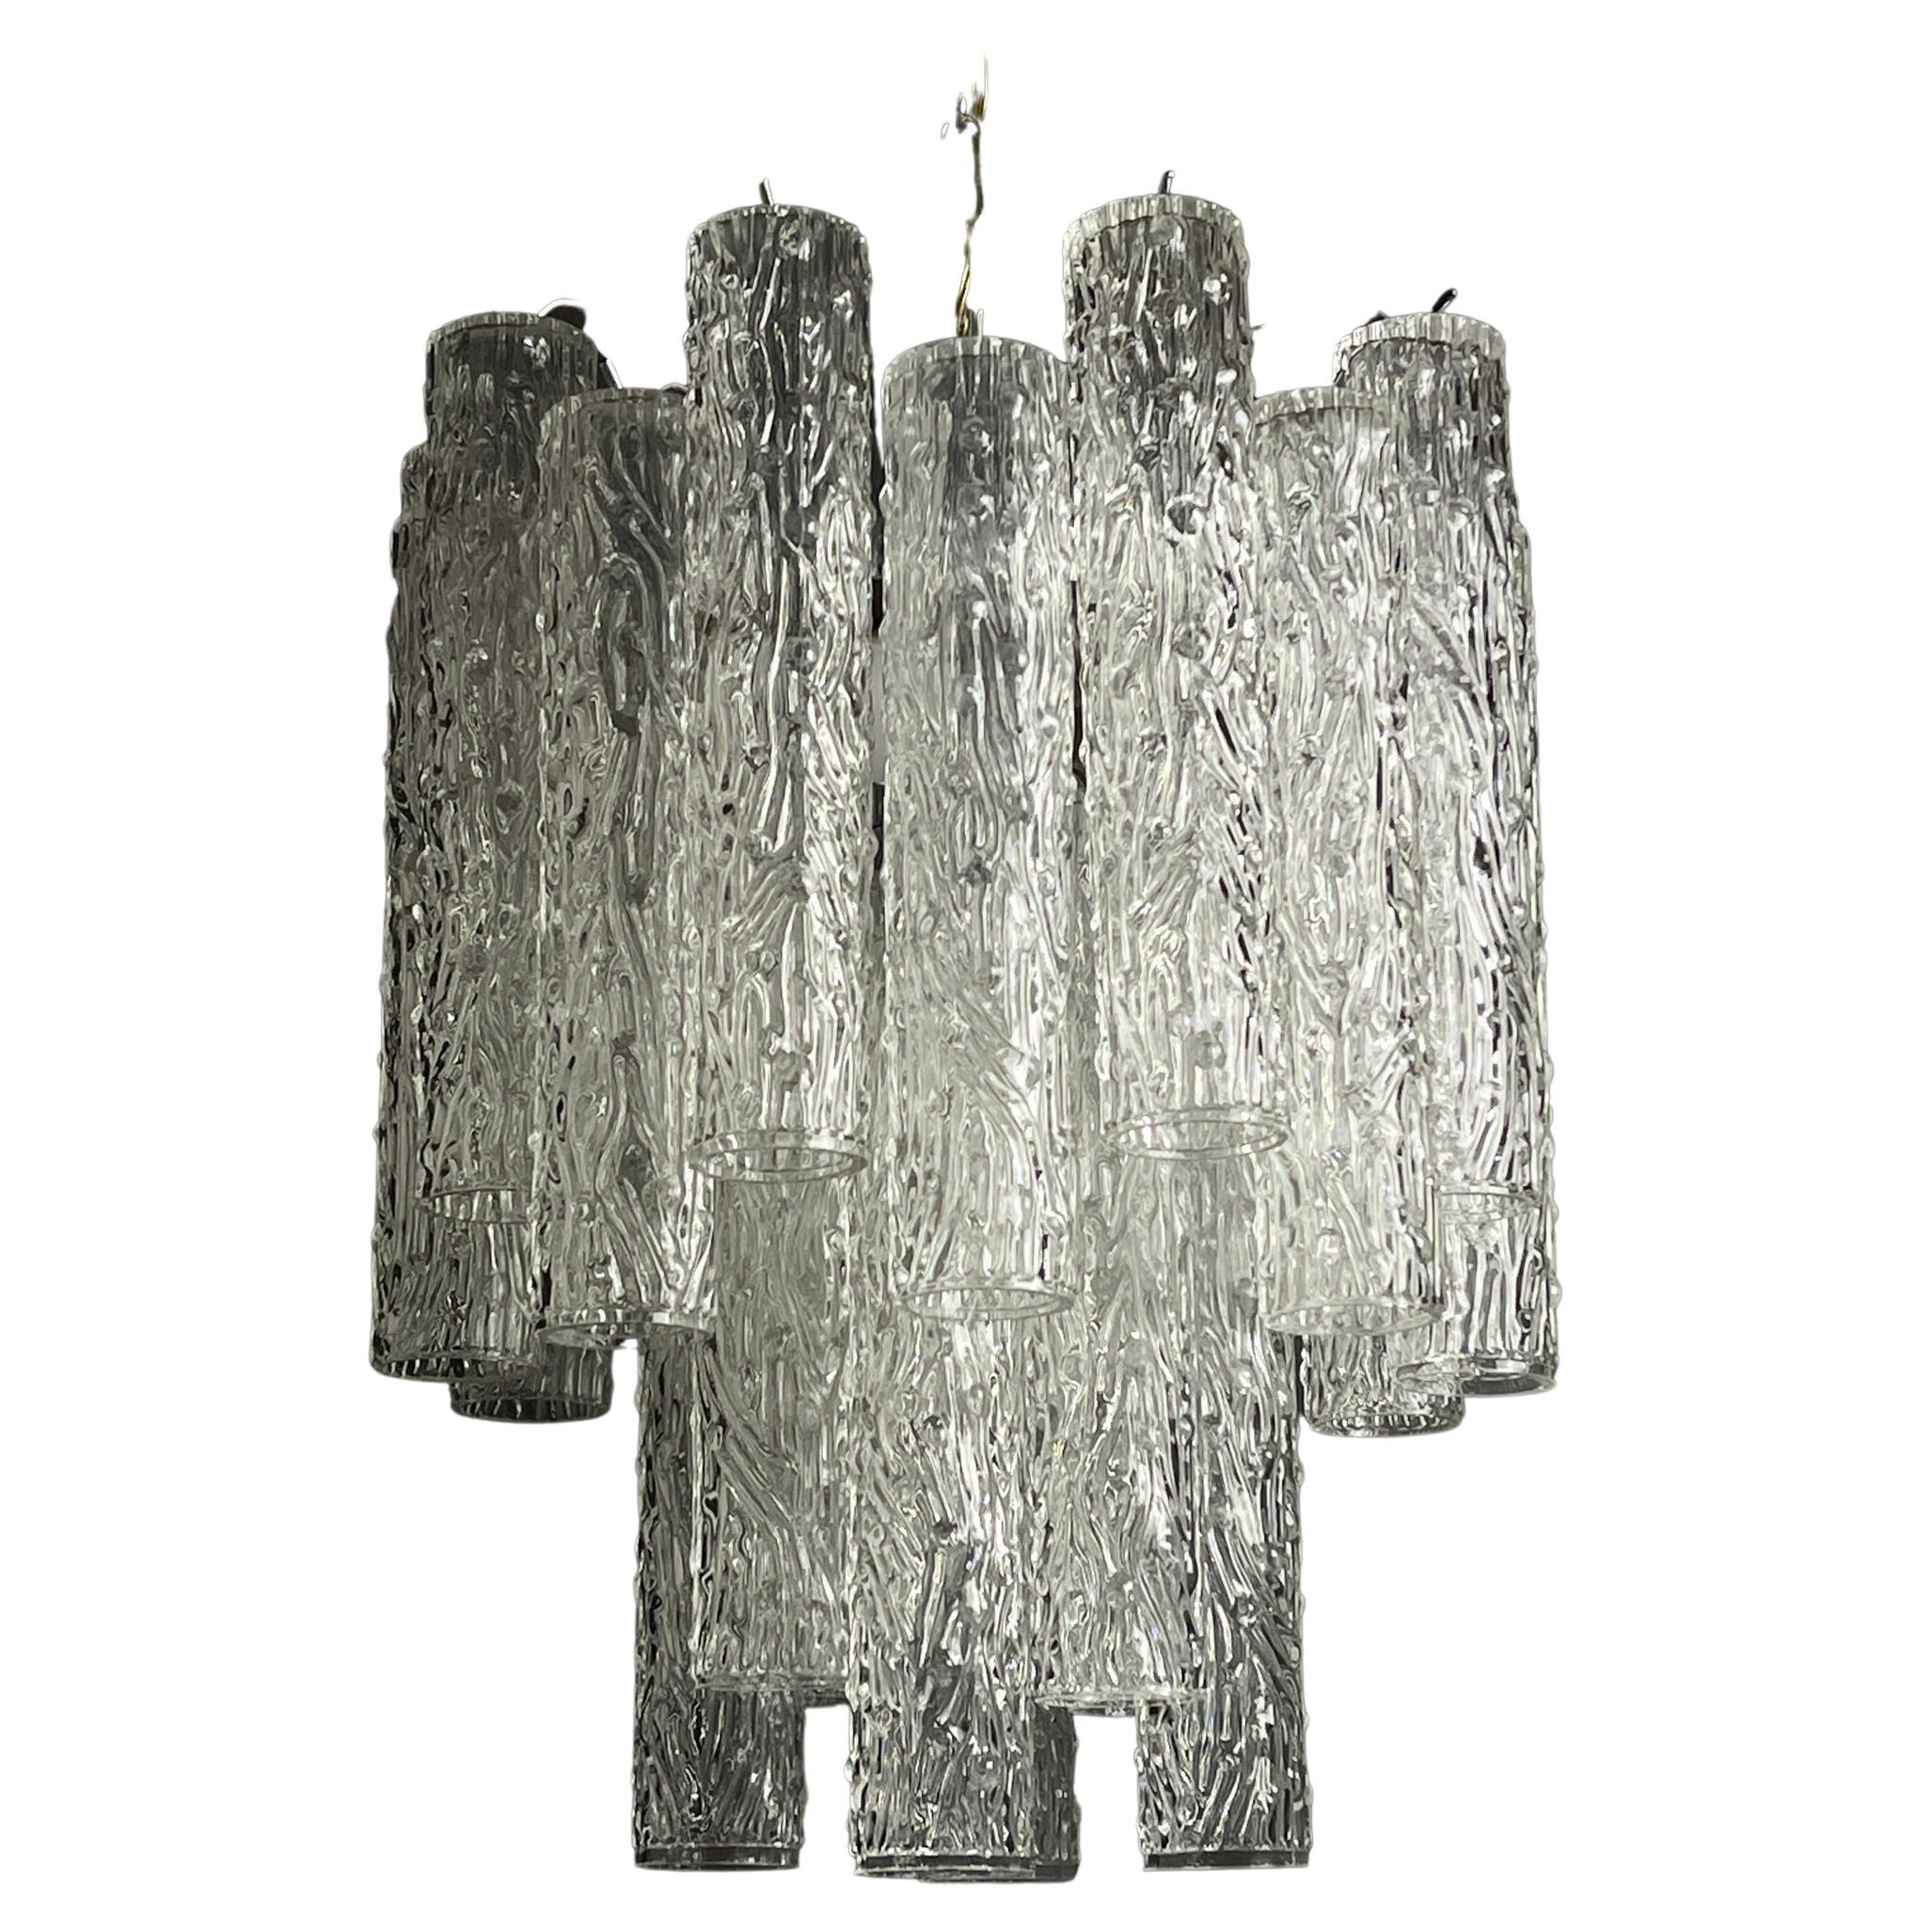 Midcentury Murano Glass Chandelier Tronchi by Toni Zuccheri for Venini Italy 19 For Sale